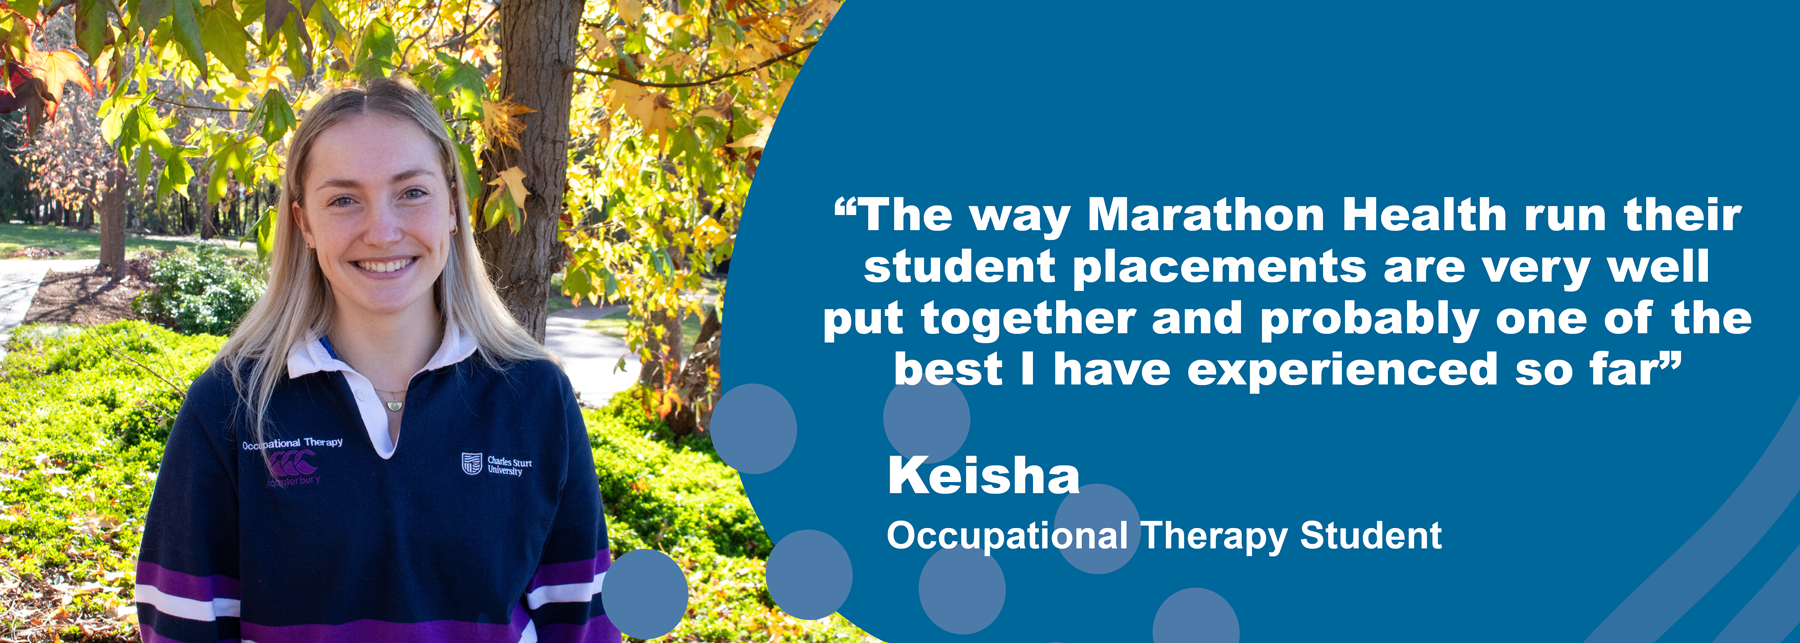 "The way Marathon Health run their student placements are very well put together and probably one of the best I have experienced so far" – Keisha, Occupational Therapy Student